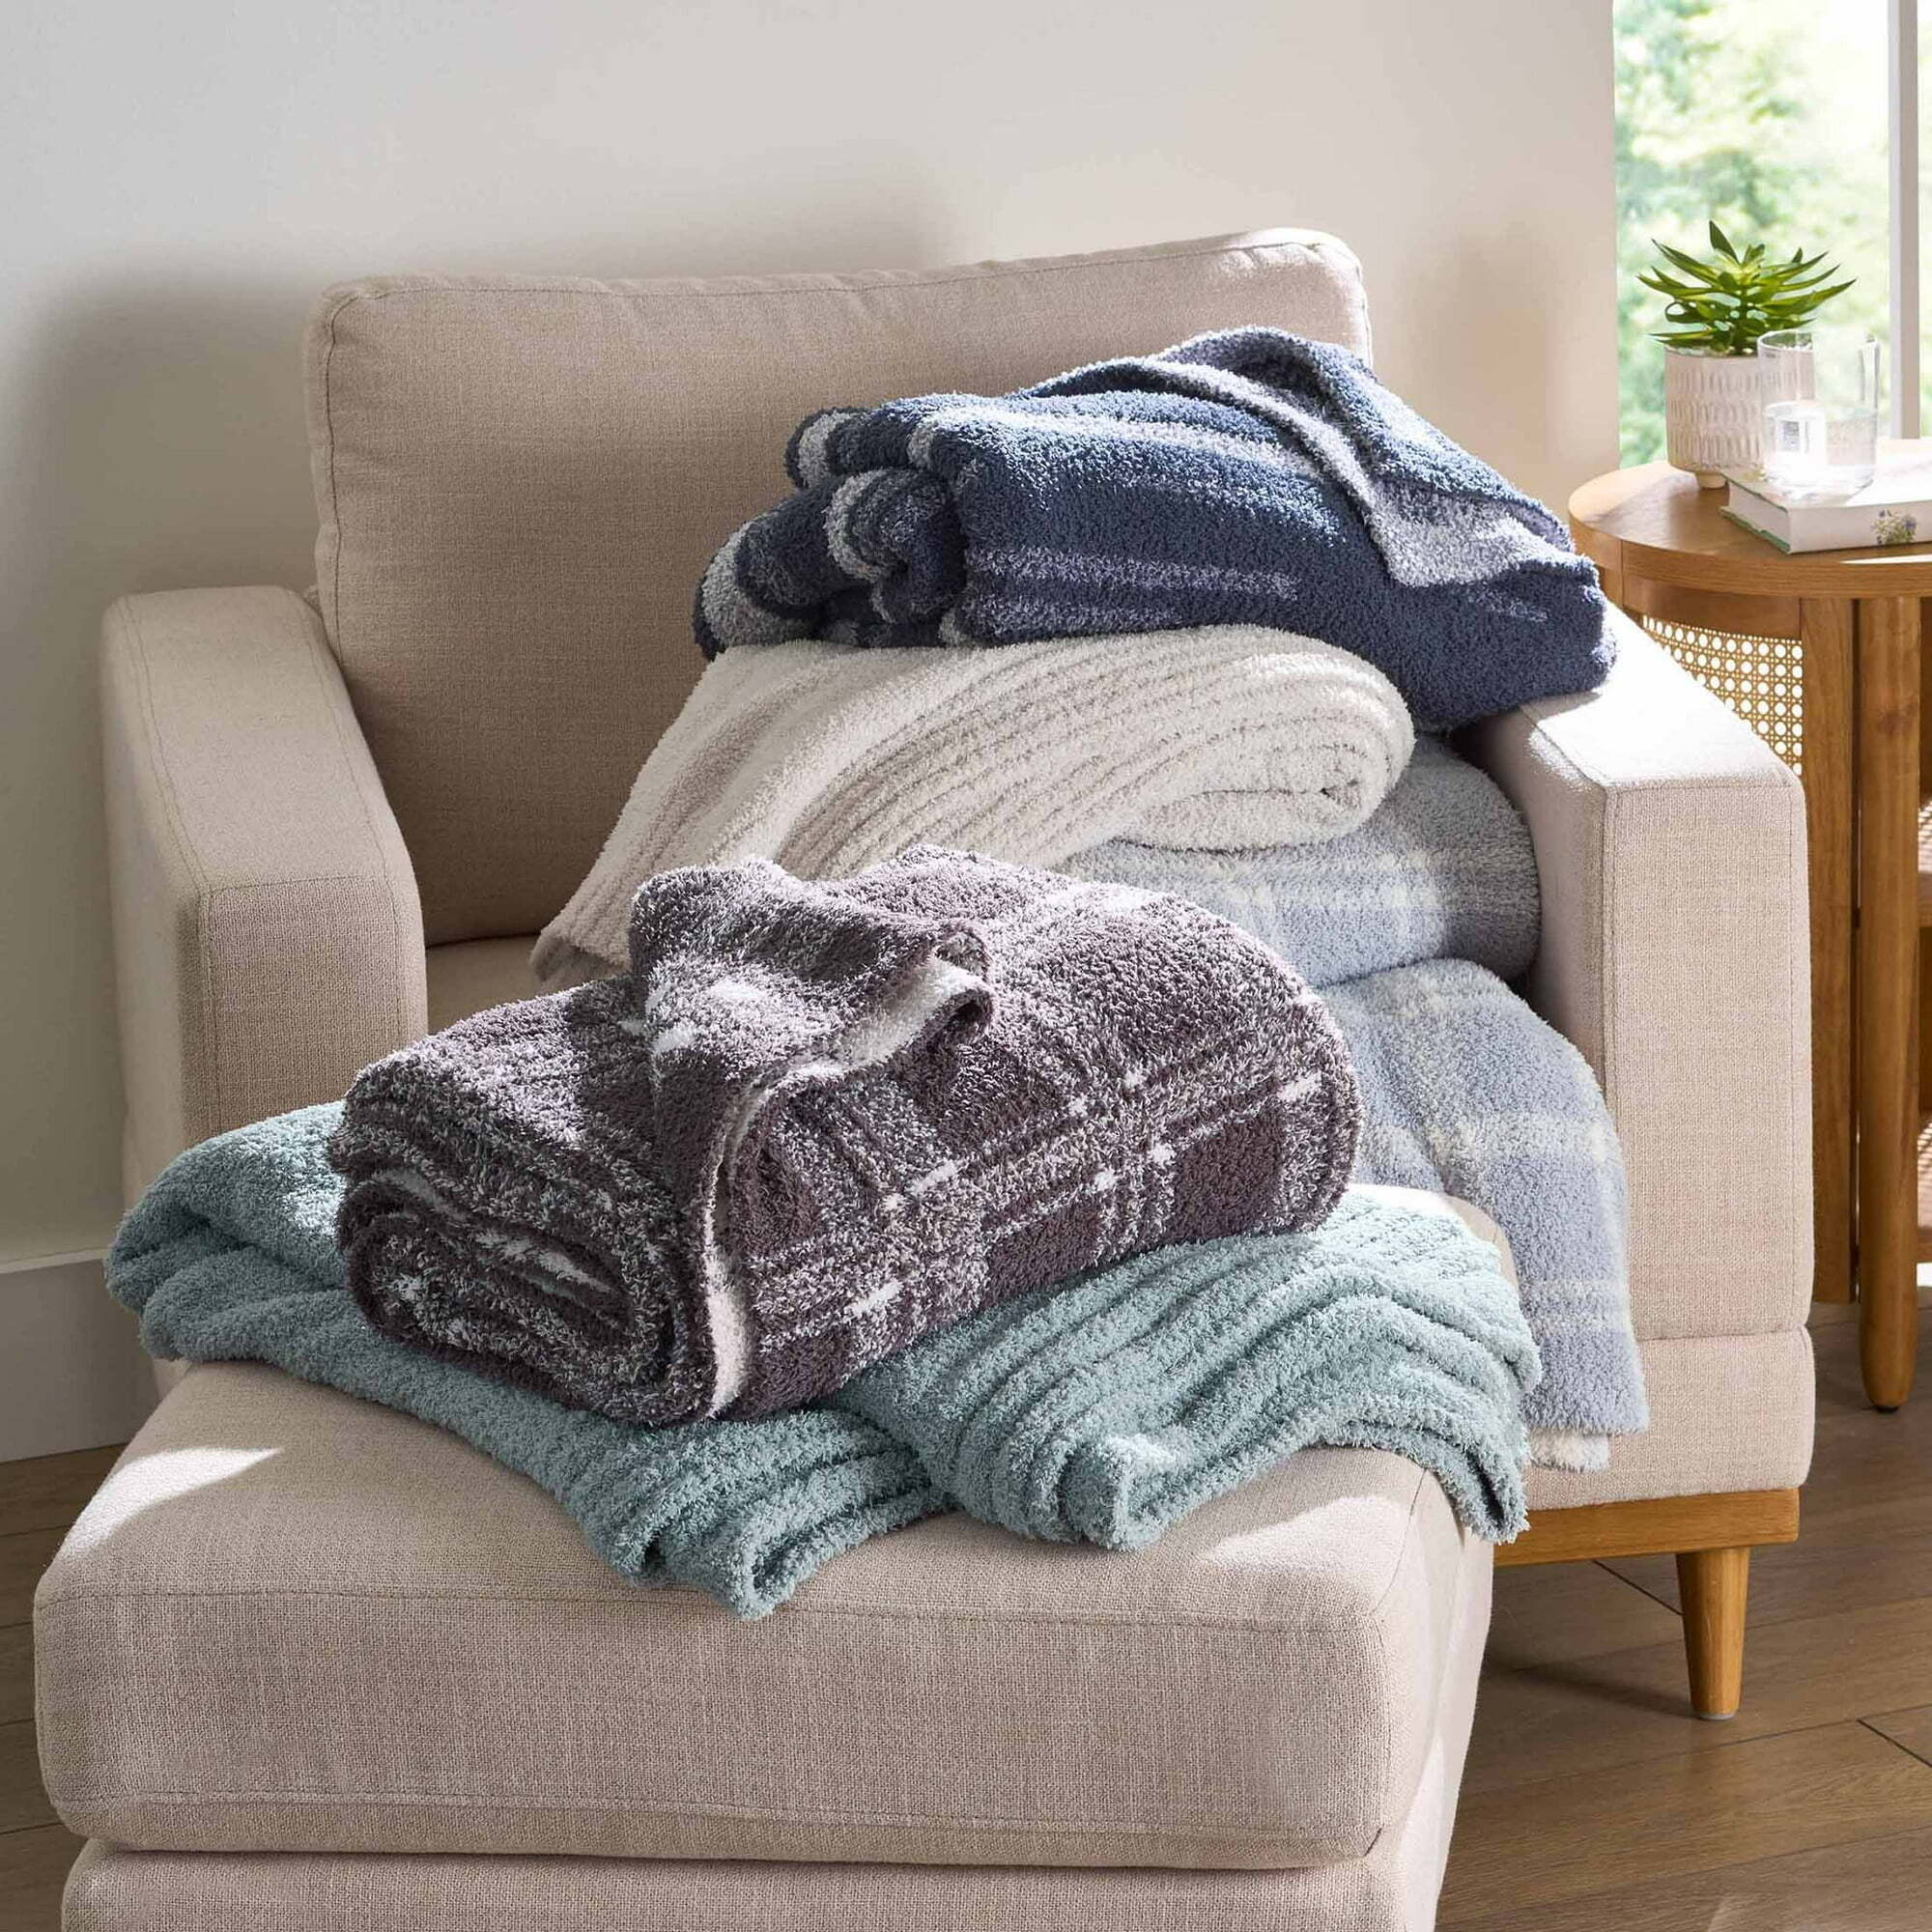 A stack of plush blankets in varied patterns on a beige armchair